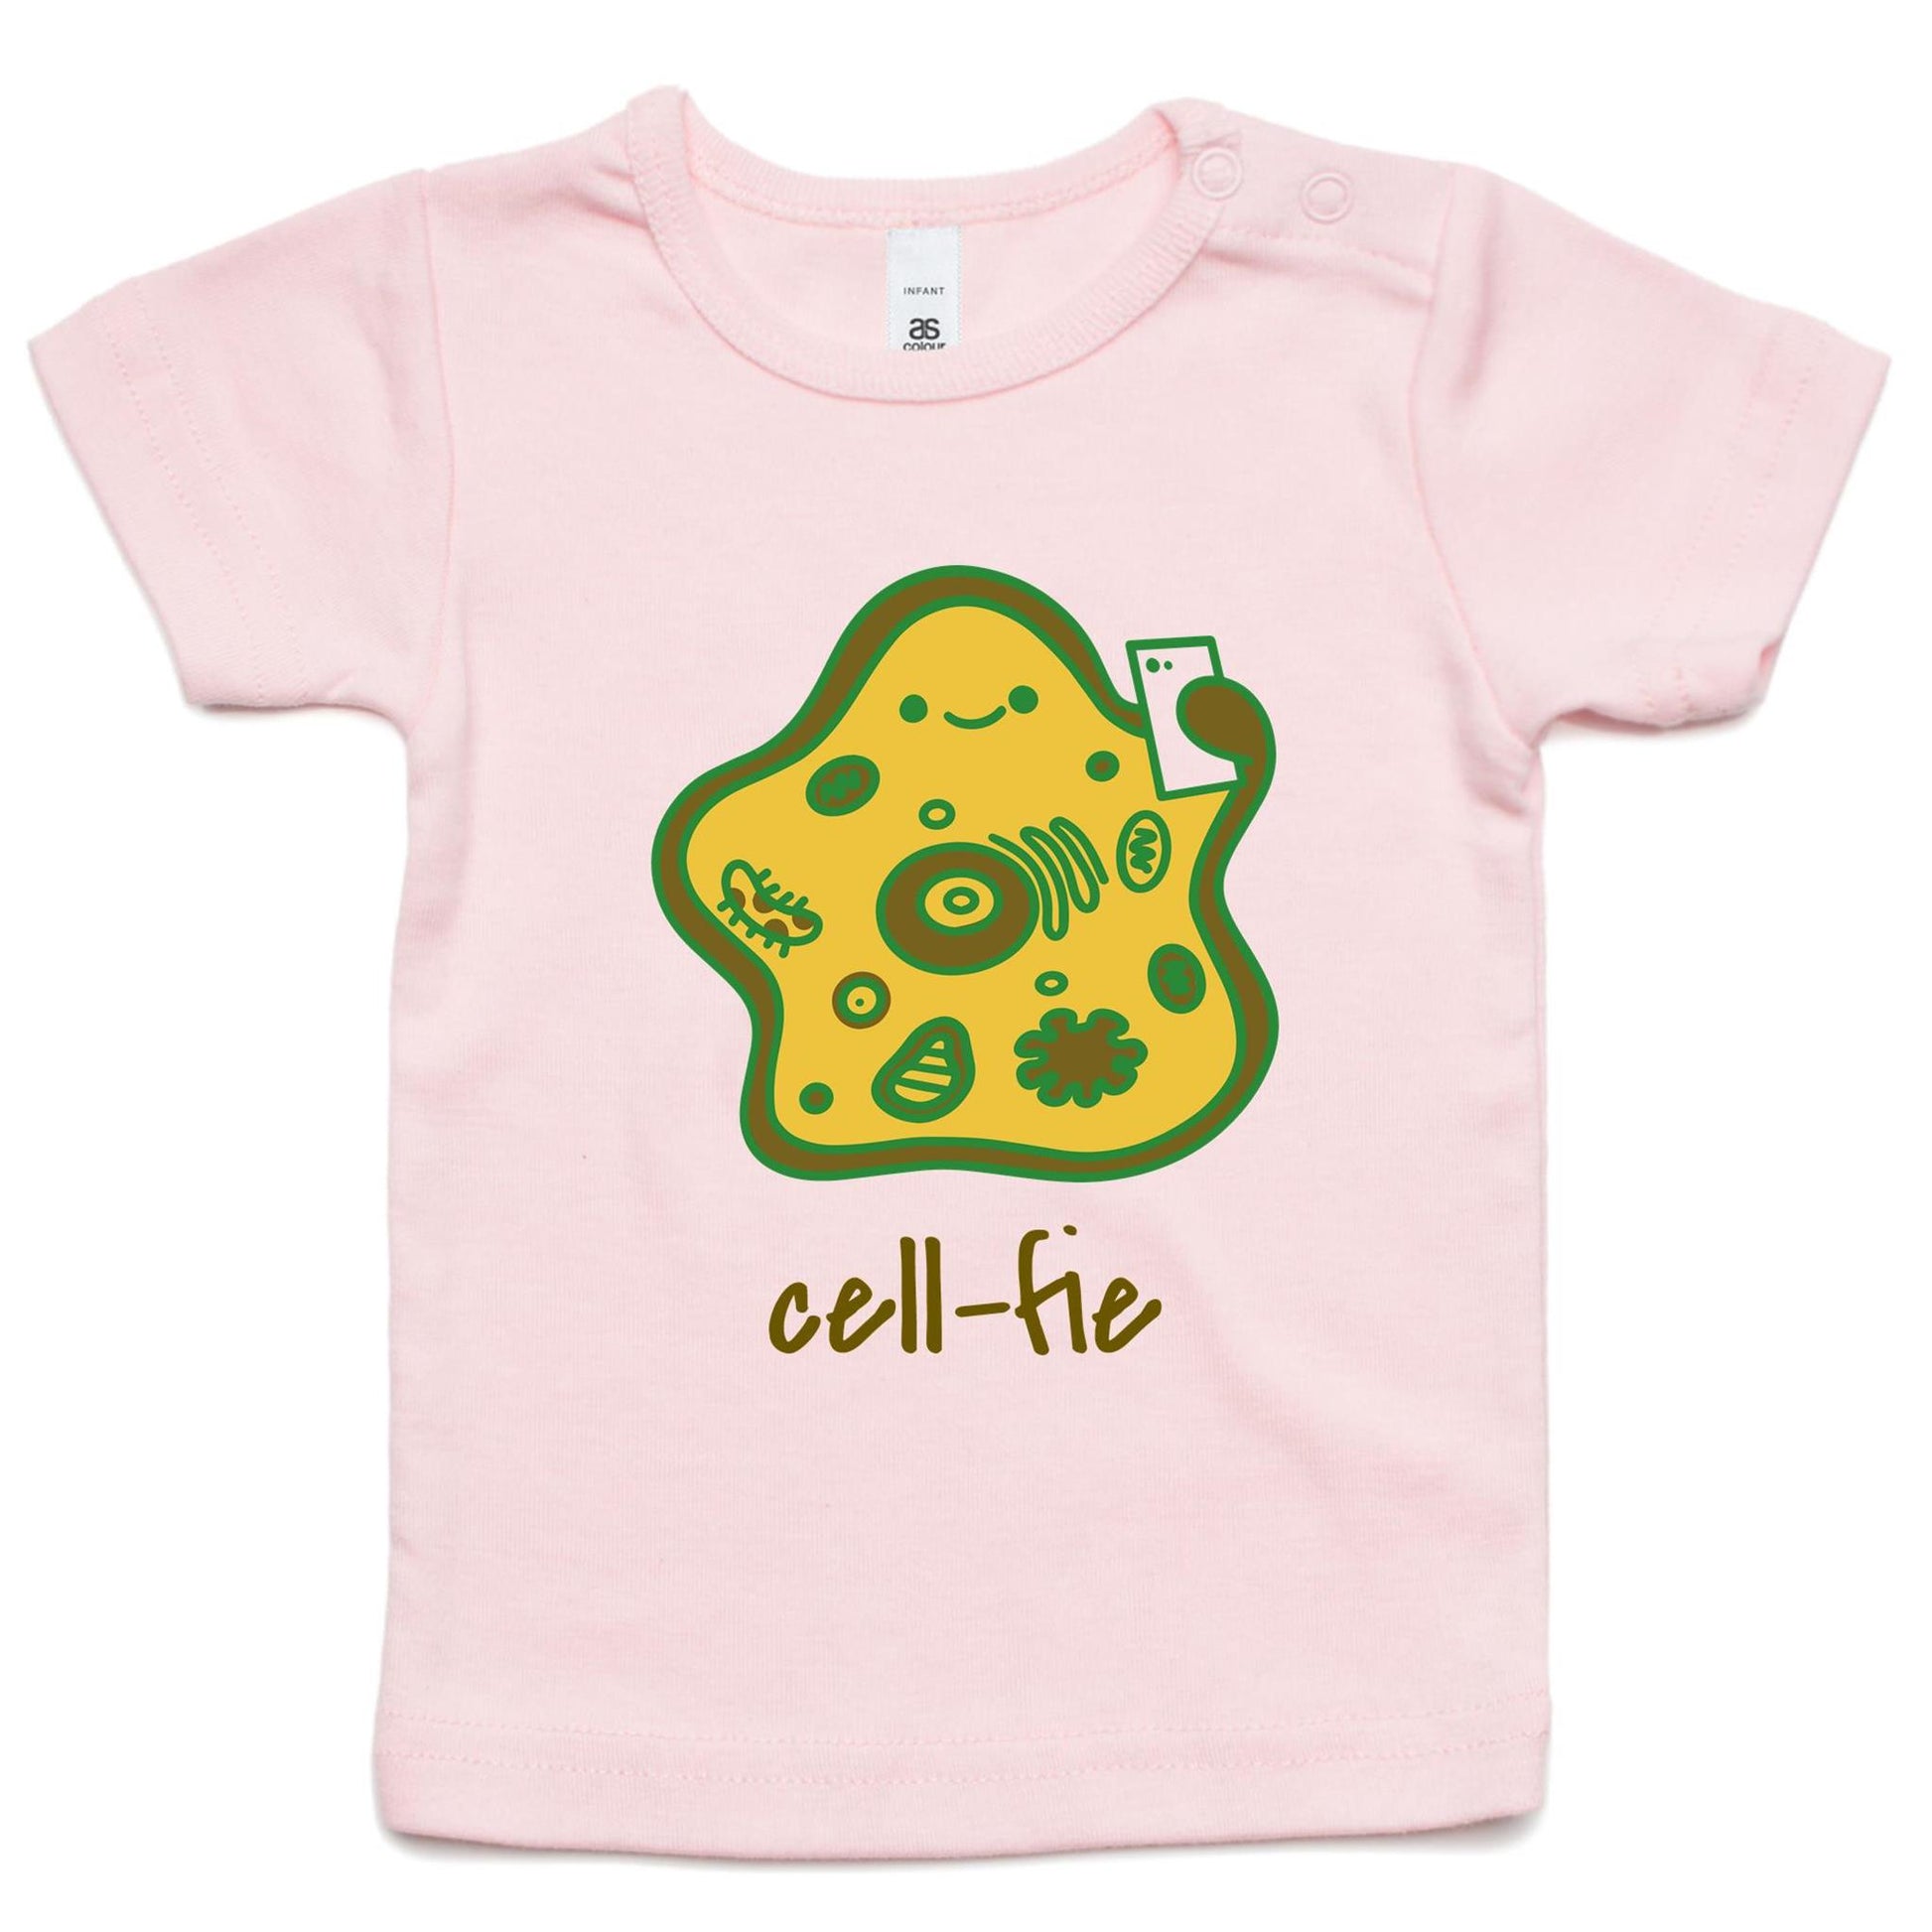 Cell-fie - Baby T-shirt Pink Baby T-shirt Science